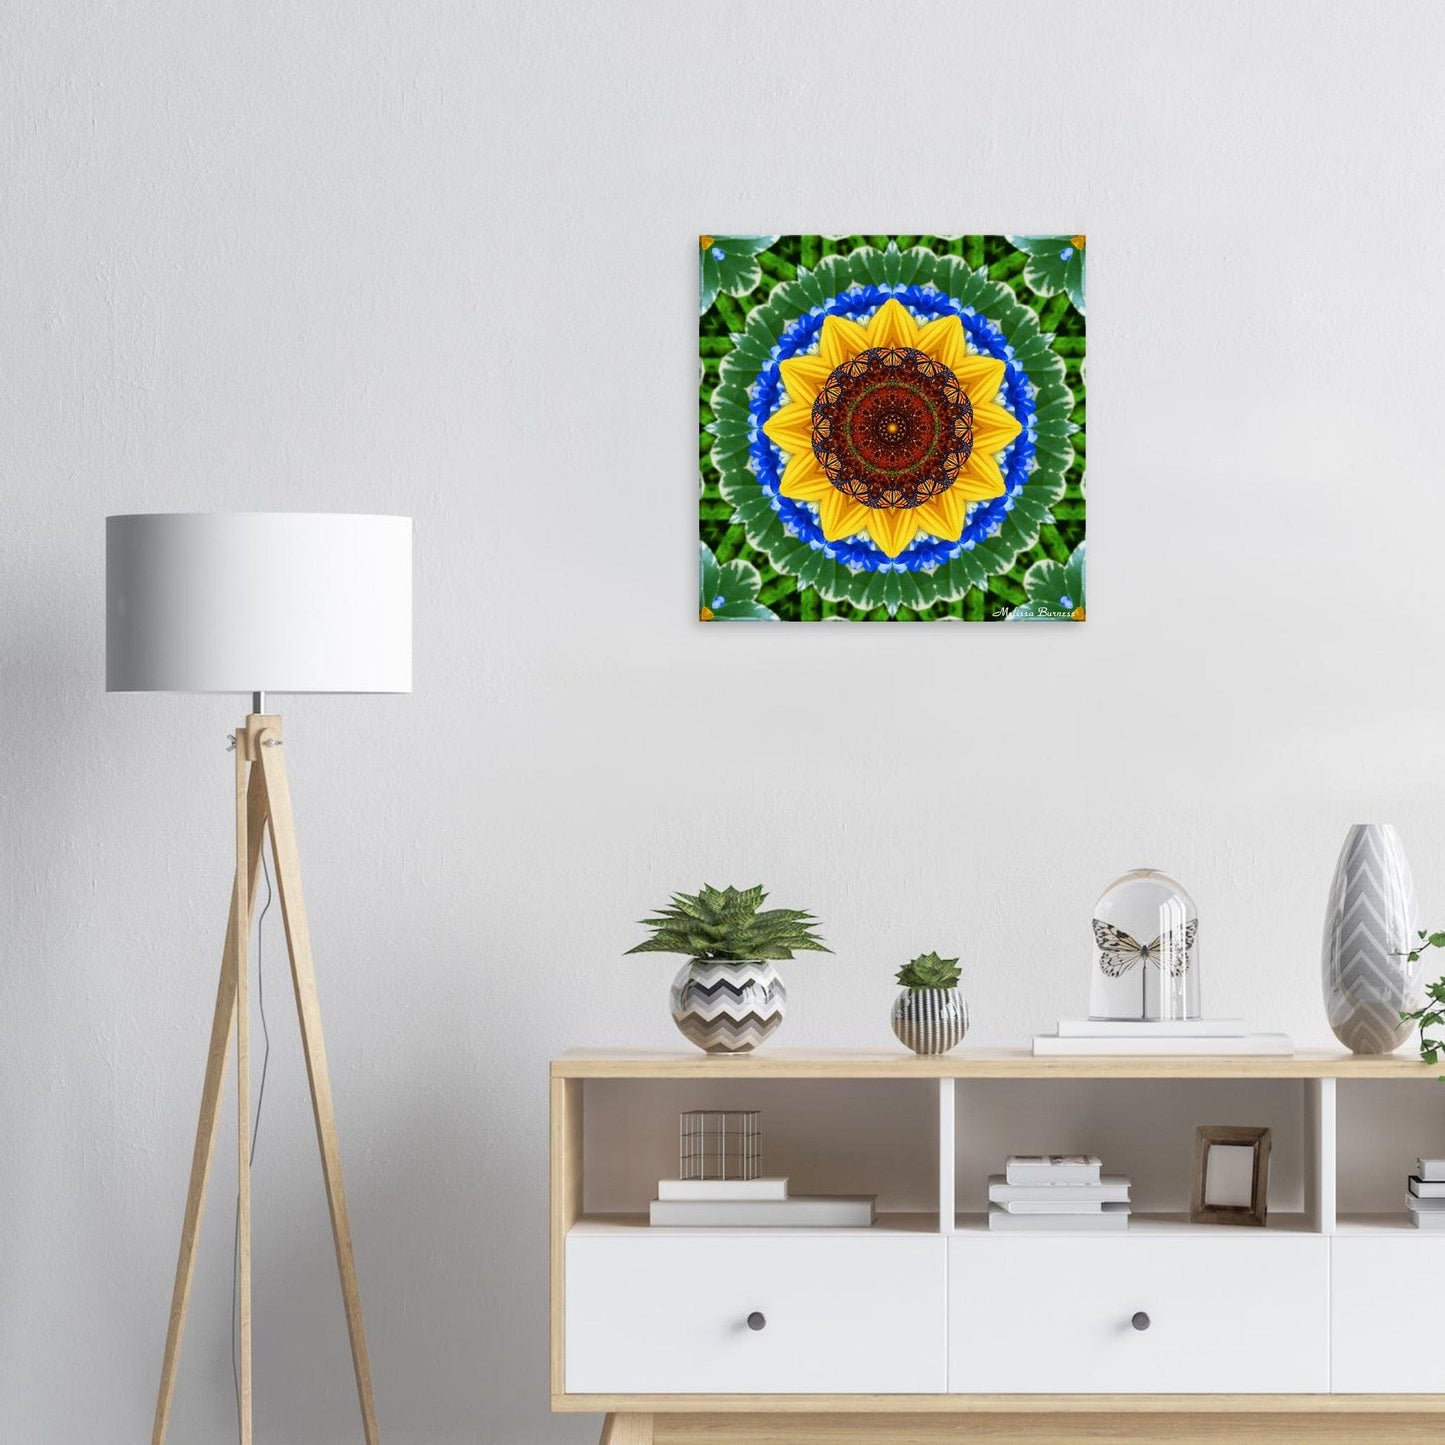 Sunflower and Monarch Butterfly Mandala Canvas Wall Art - Vibrant Nature-inspired Home Decor